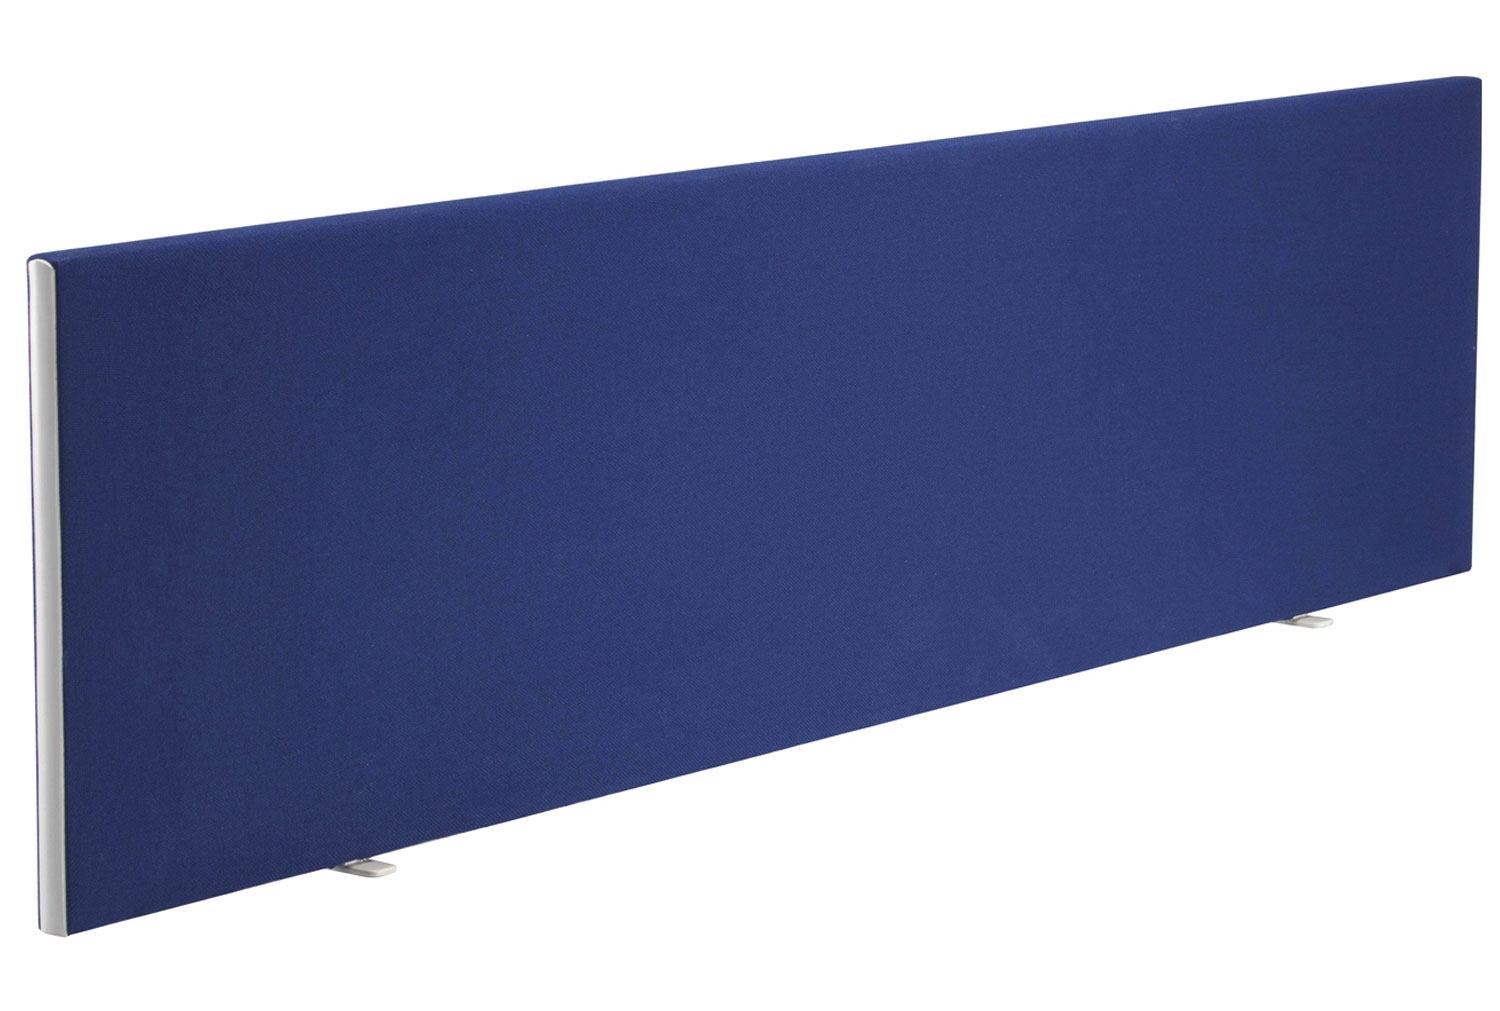 Whist Economy Rectangular Desktop Office Screens, 140wx40h (cm), Royal Blue, Express Delivery